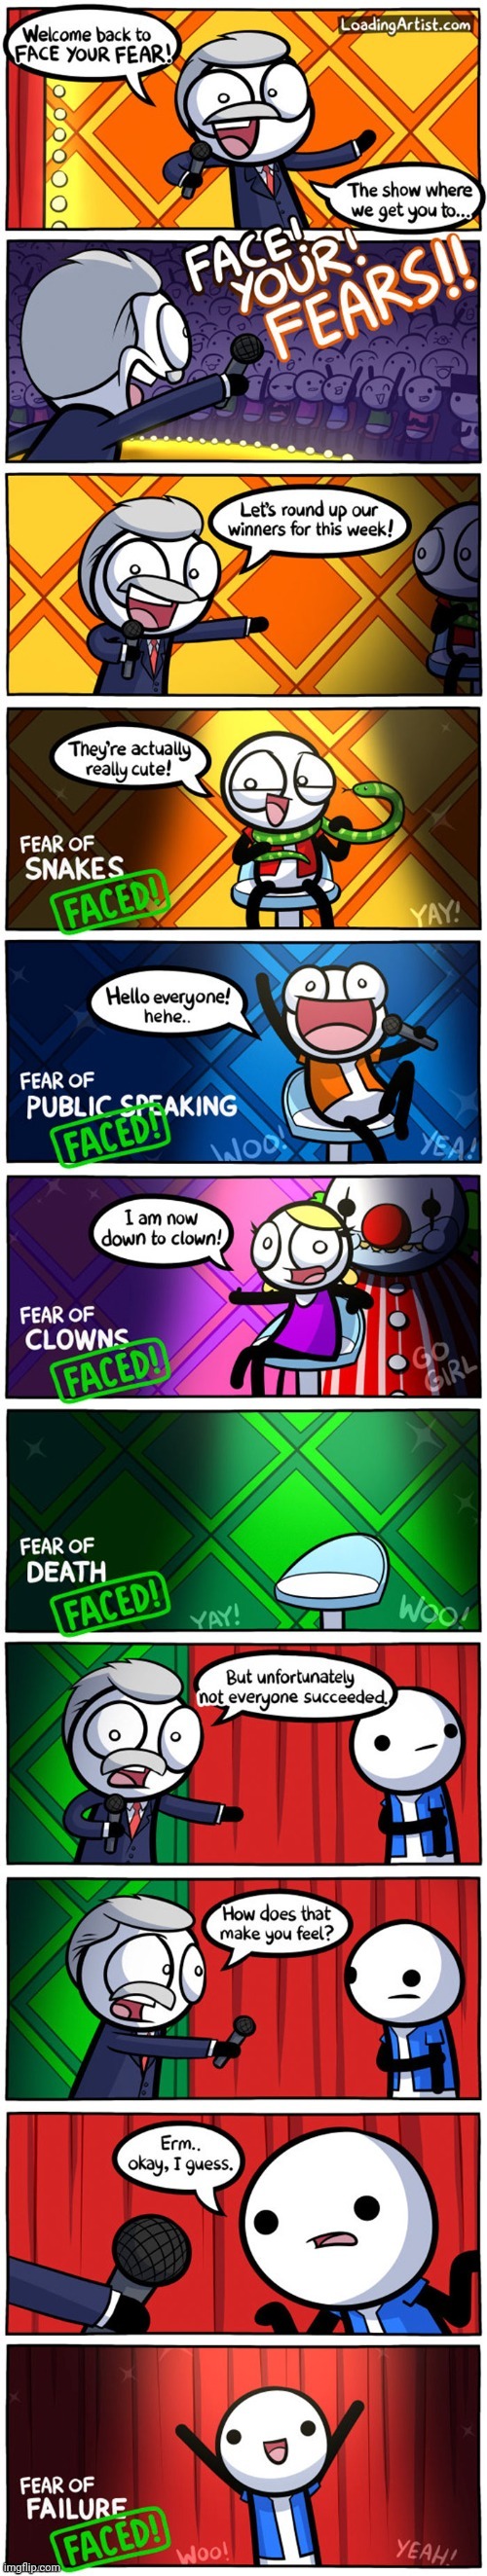 Face your fear game | image tagged in face,fear,game,loading artist,comics,comics/cartoons | made w/ Imgflip meme maker